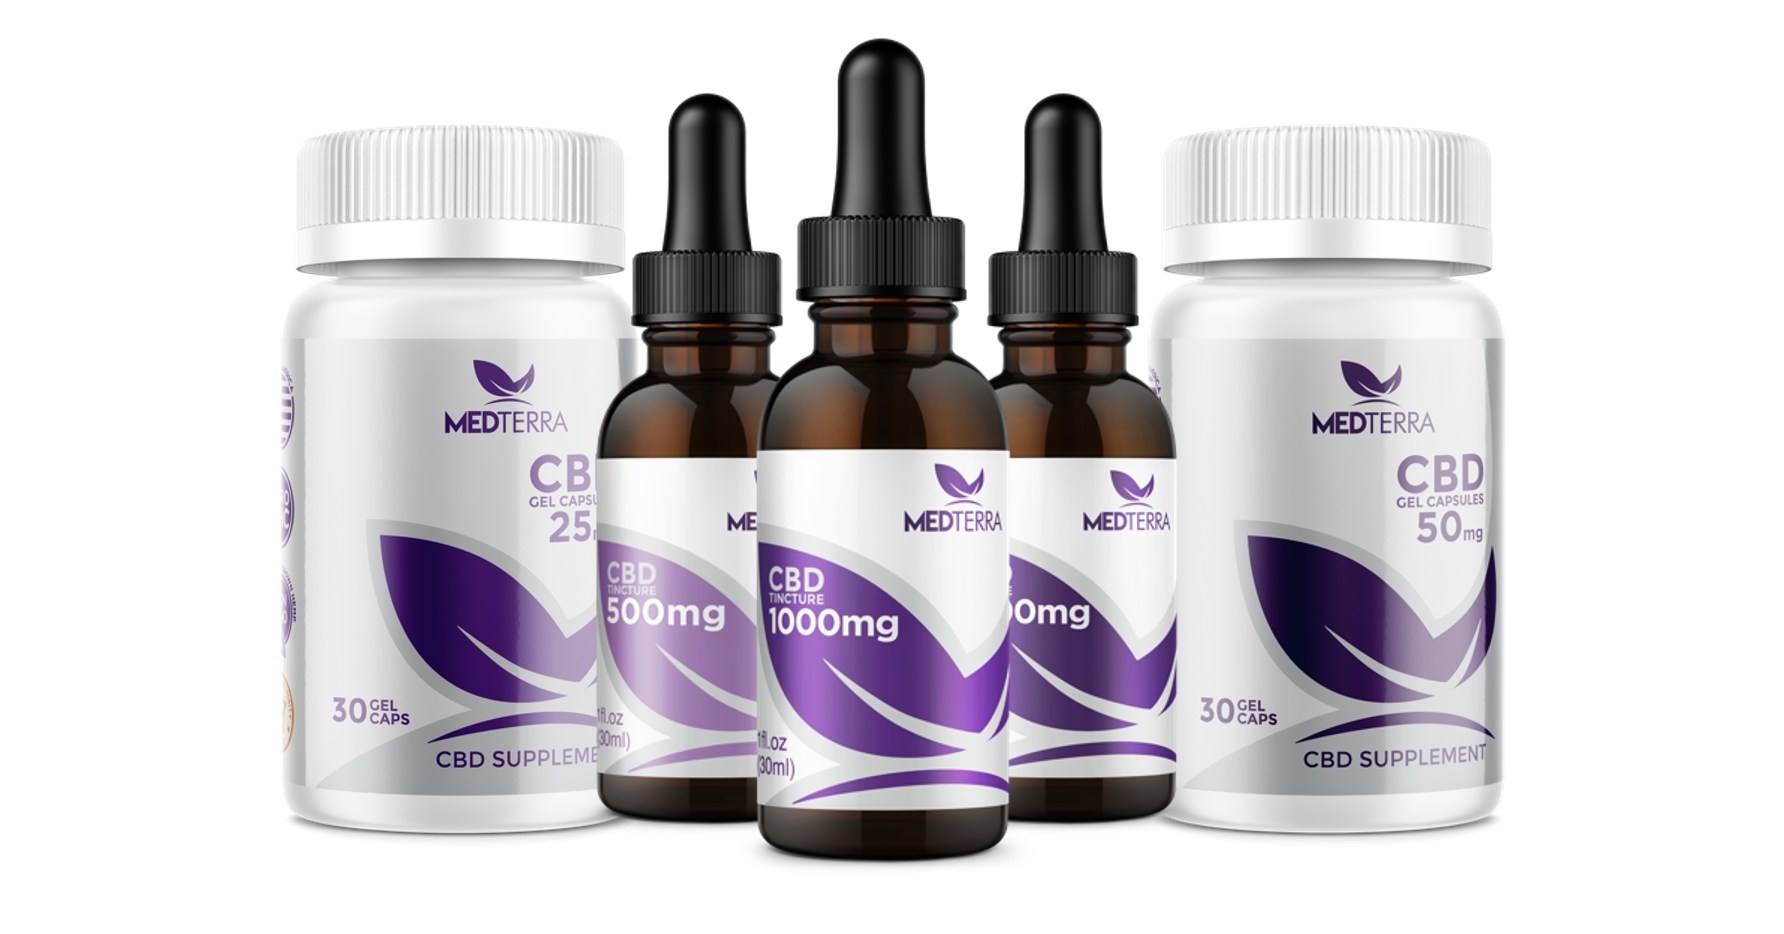 5 Medterra Products That Will Change Our Daily Routine Forever